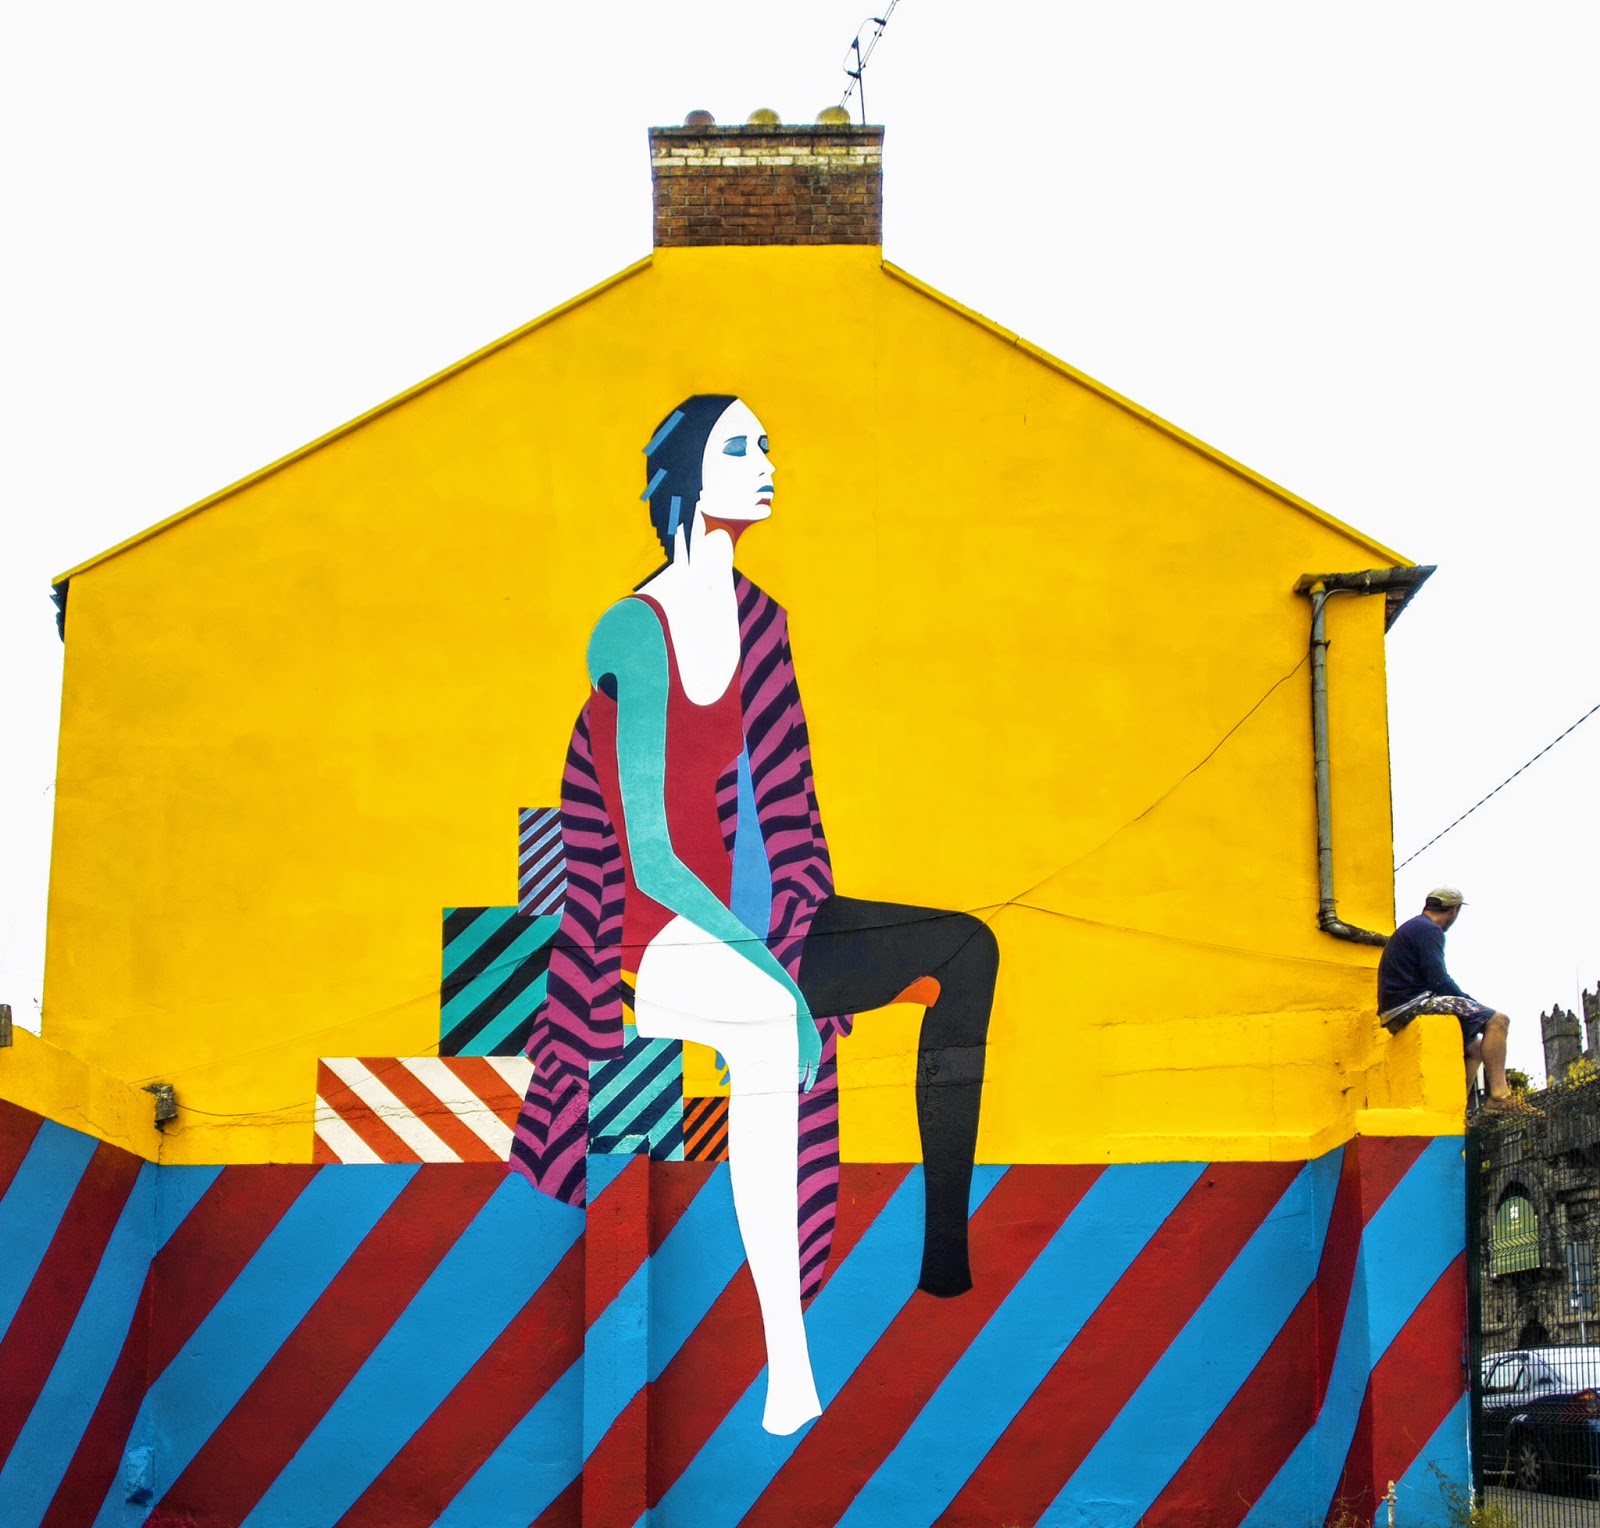 Maser is still in Ireland where he was invited to paint this new piece somewhere on the streets of Limerick City.